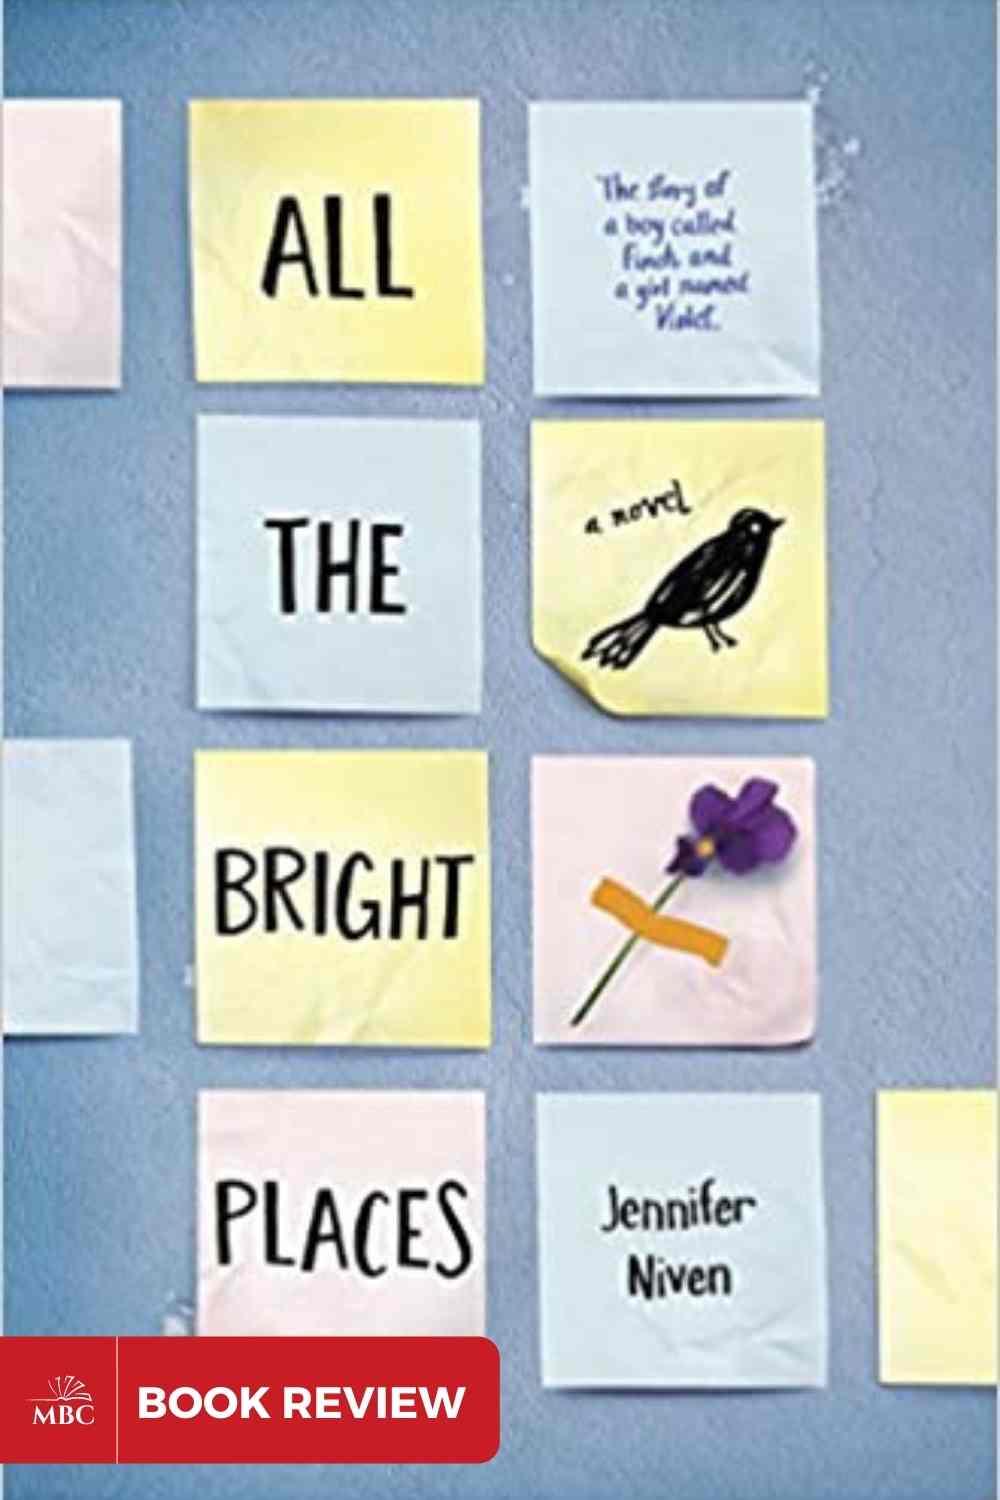 BOOK REVIEW: All the Bright Places